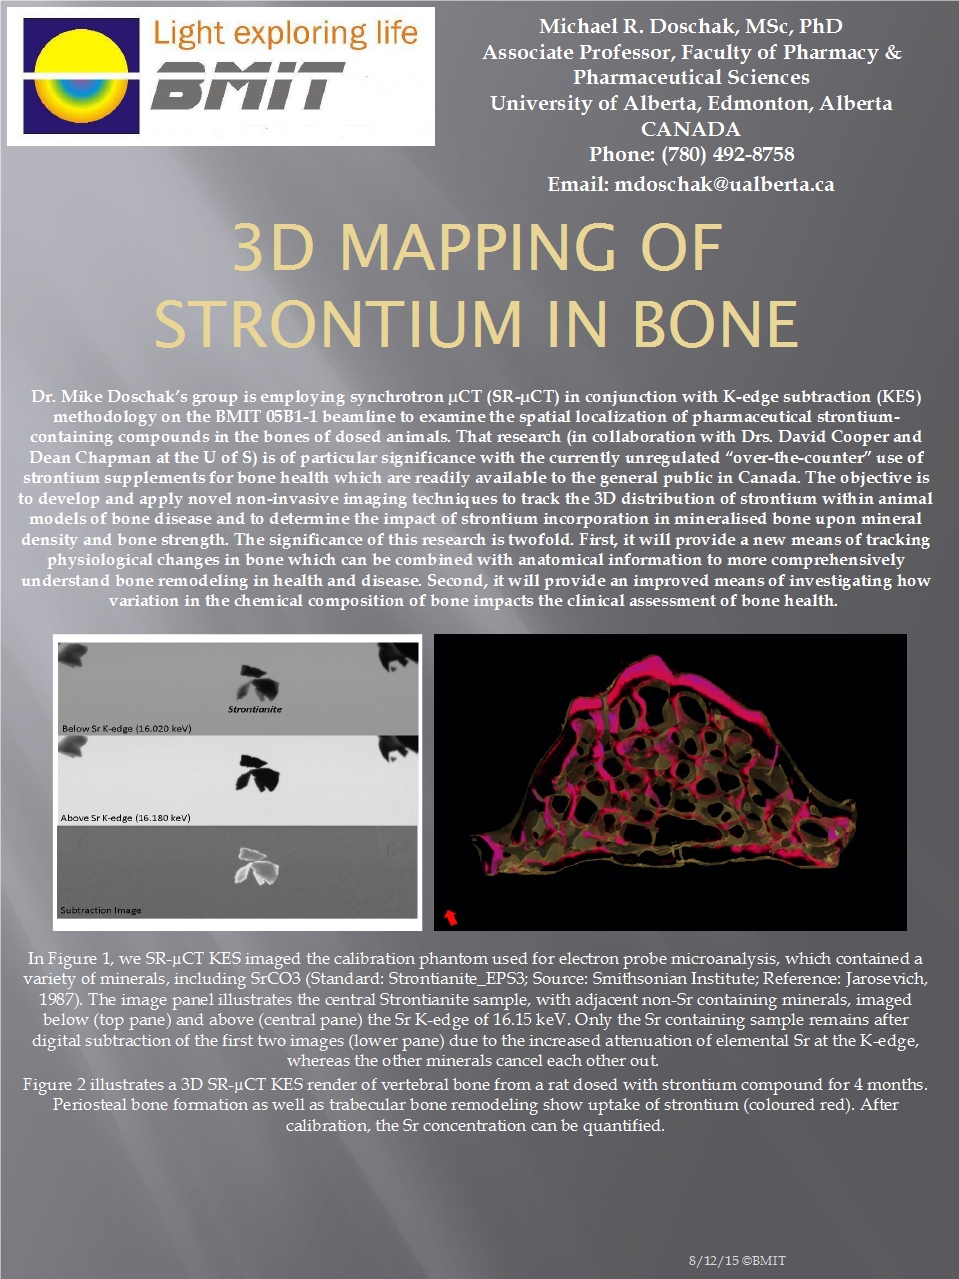 3D Mapping Of Strontium in Bone Image